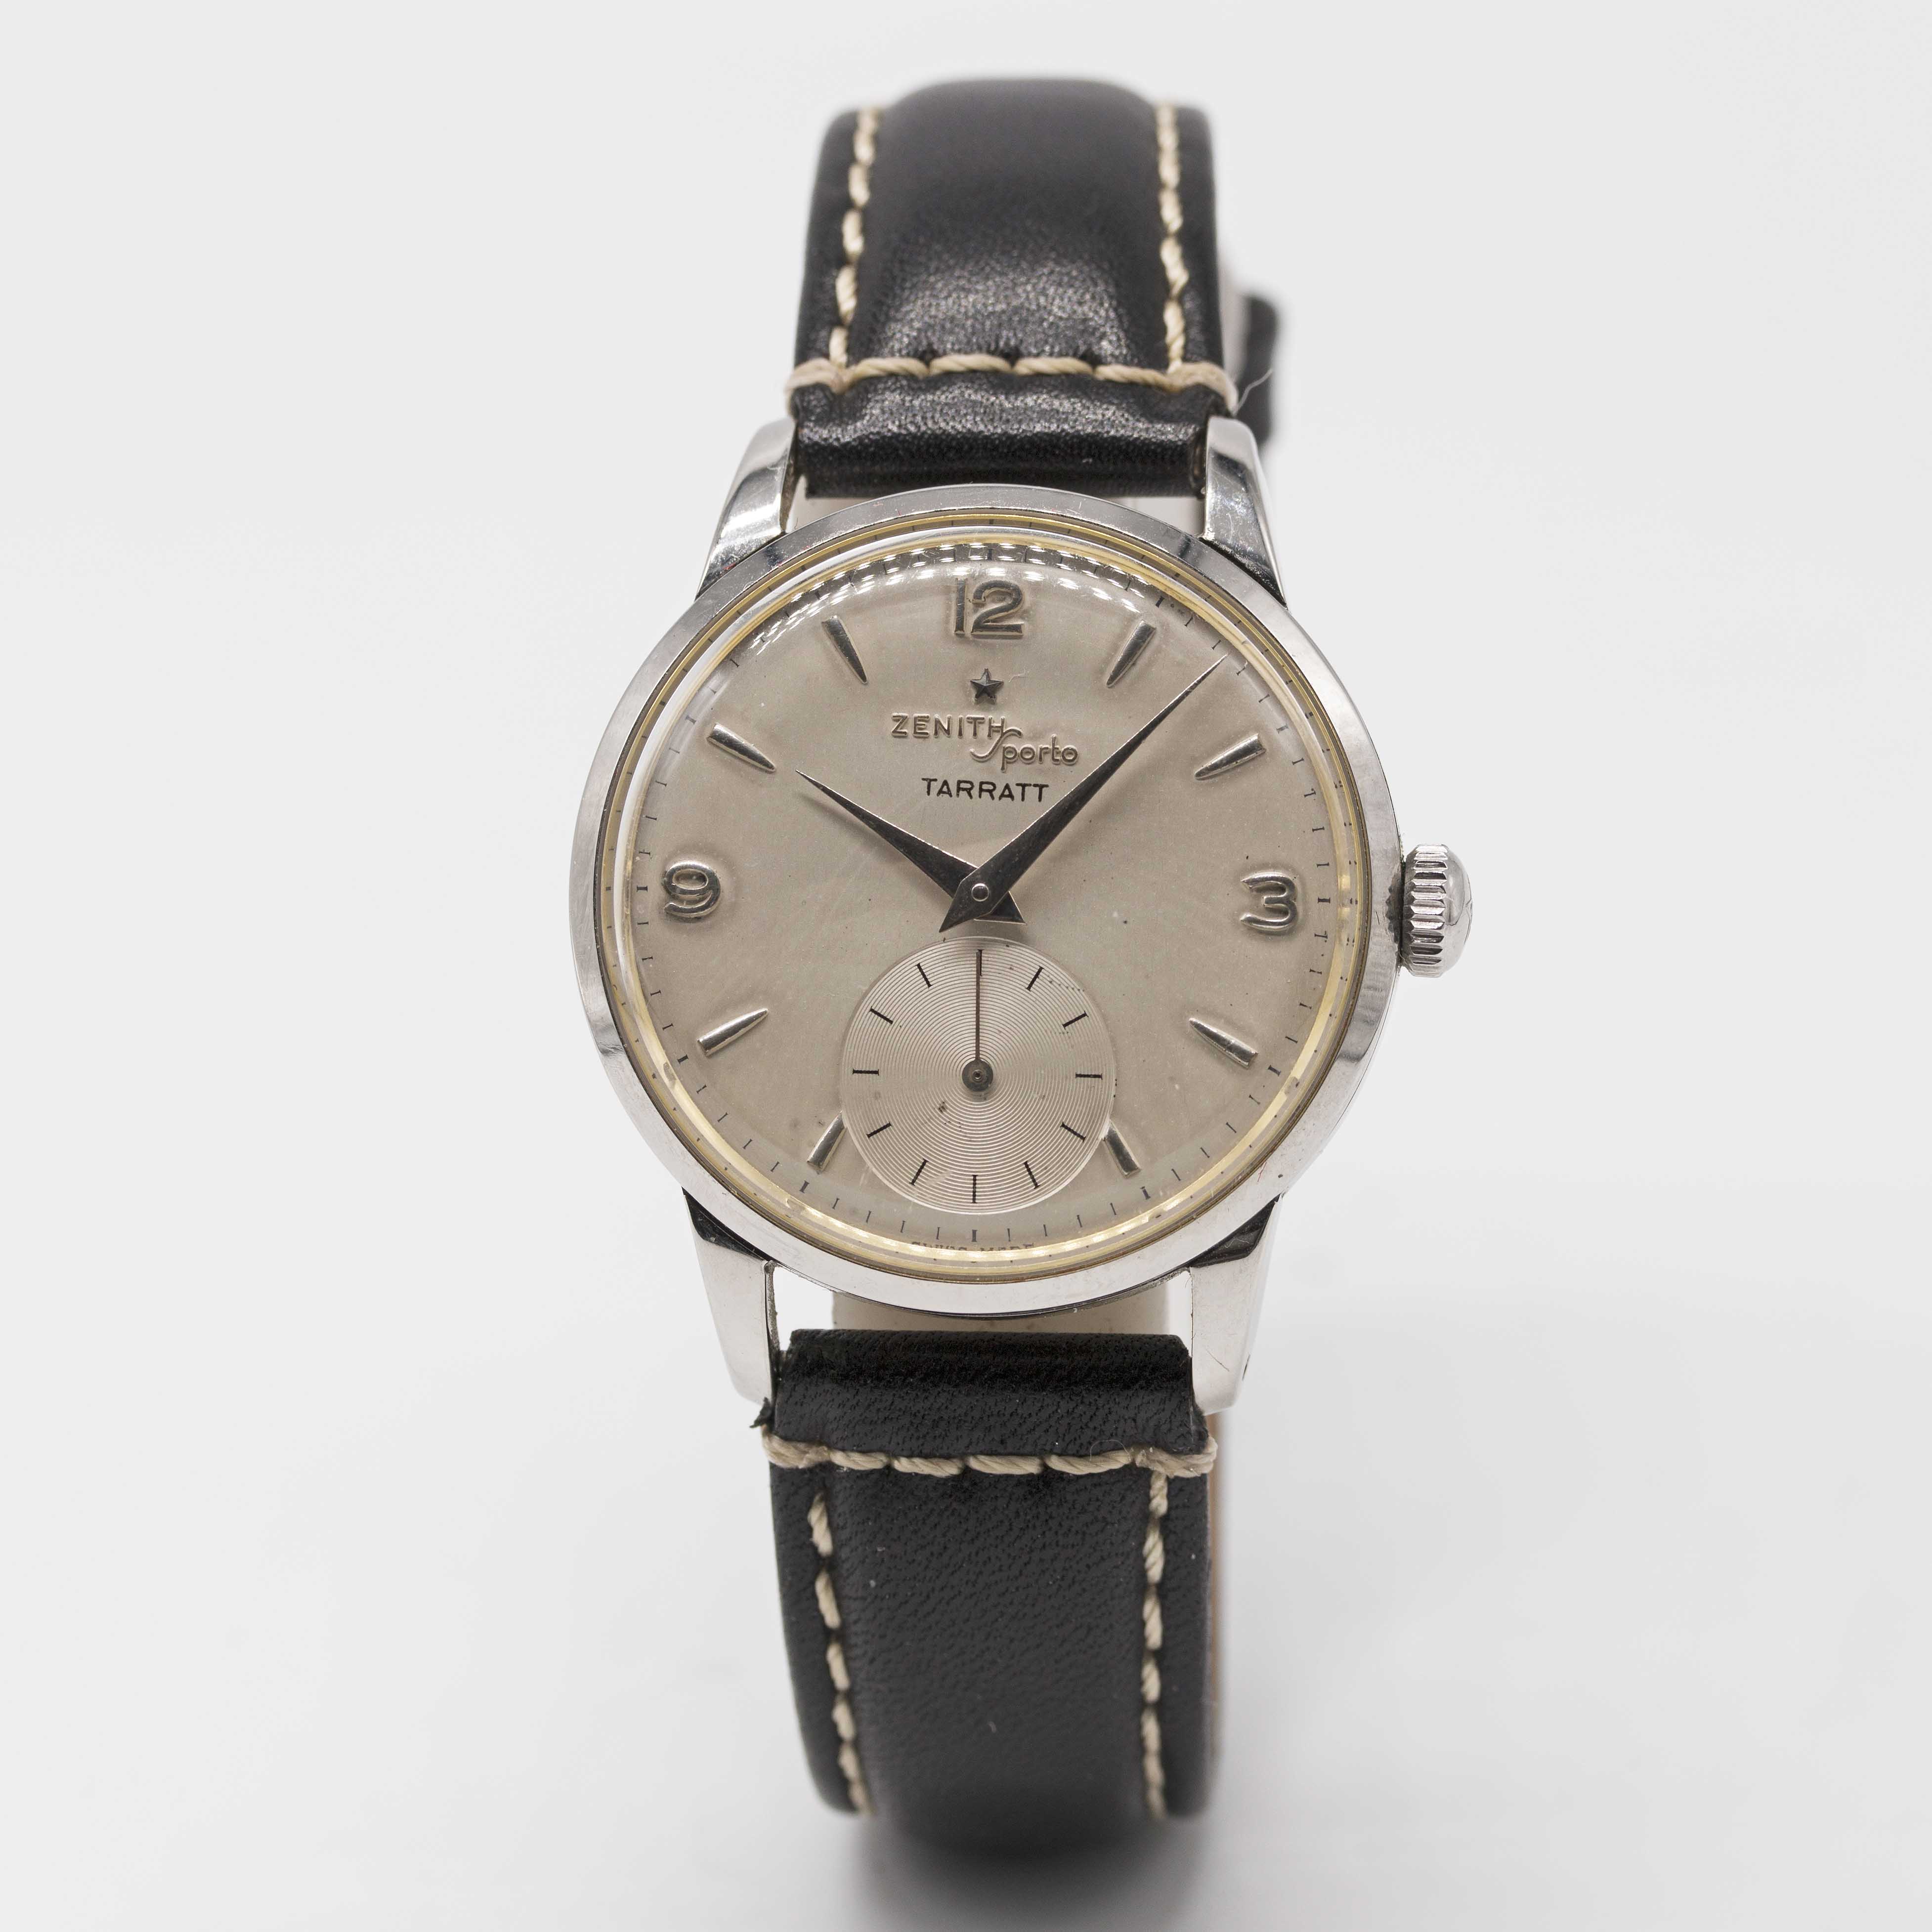 A GENTLEMAN'S STAINLESS STEEL ZENITH SPORTO WRIST WATCH CIRCA 1960, RETAILED BY TARRATT WITH CO- - Image 2 of 8